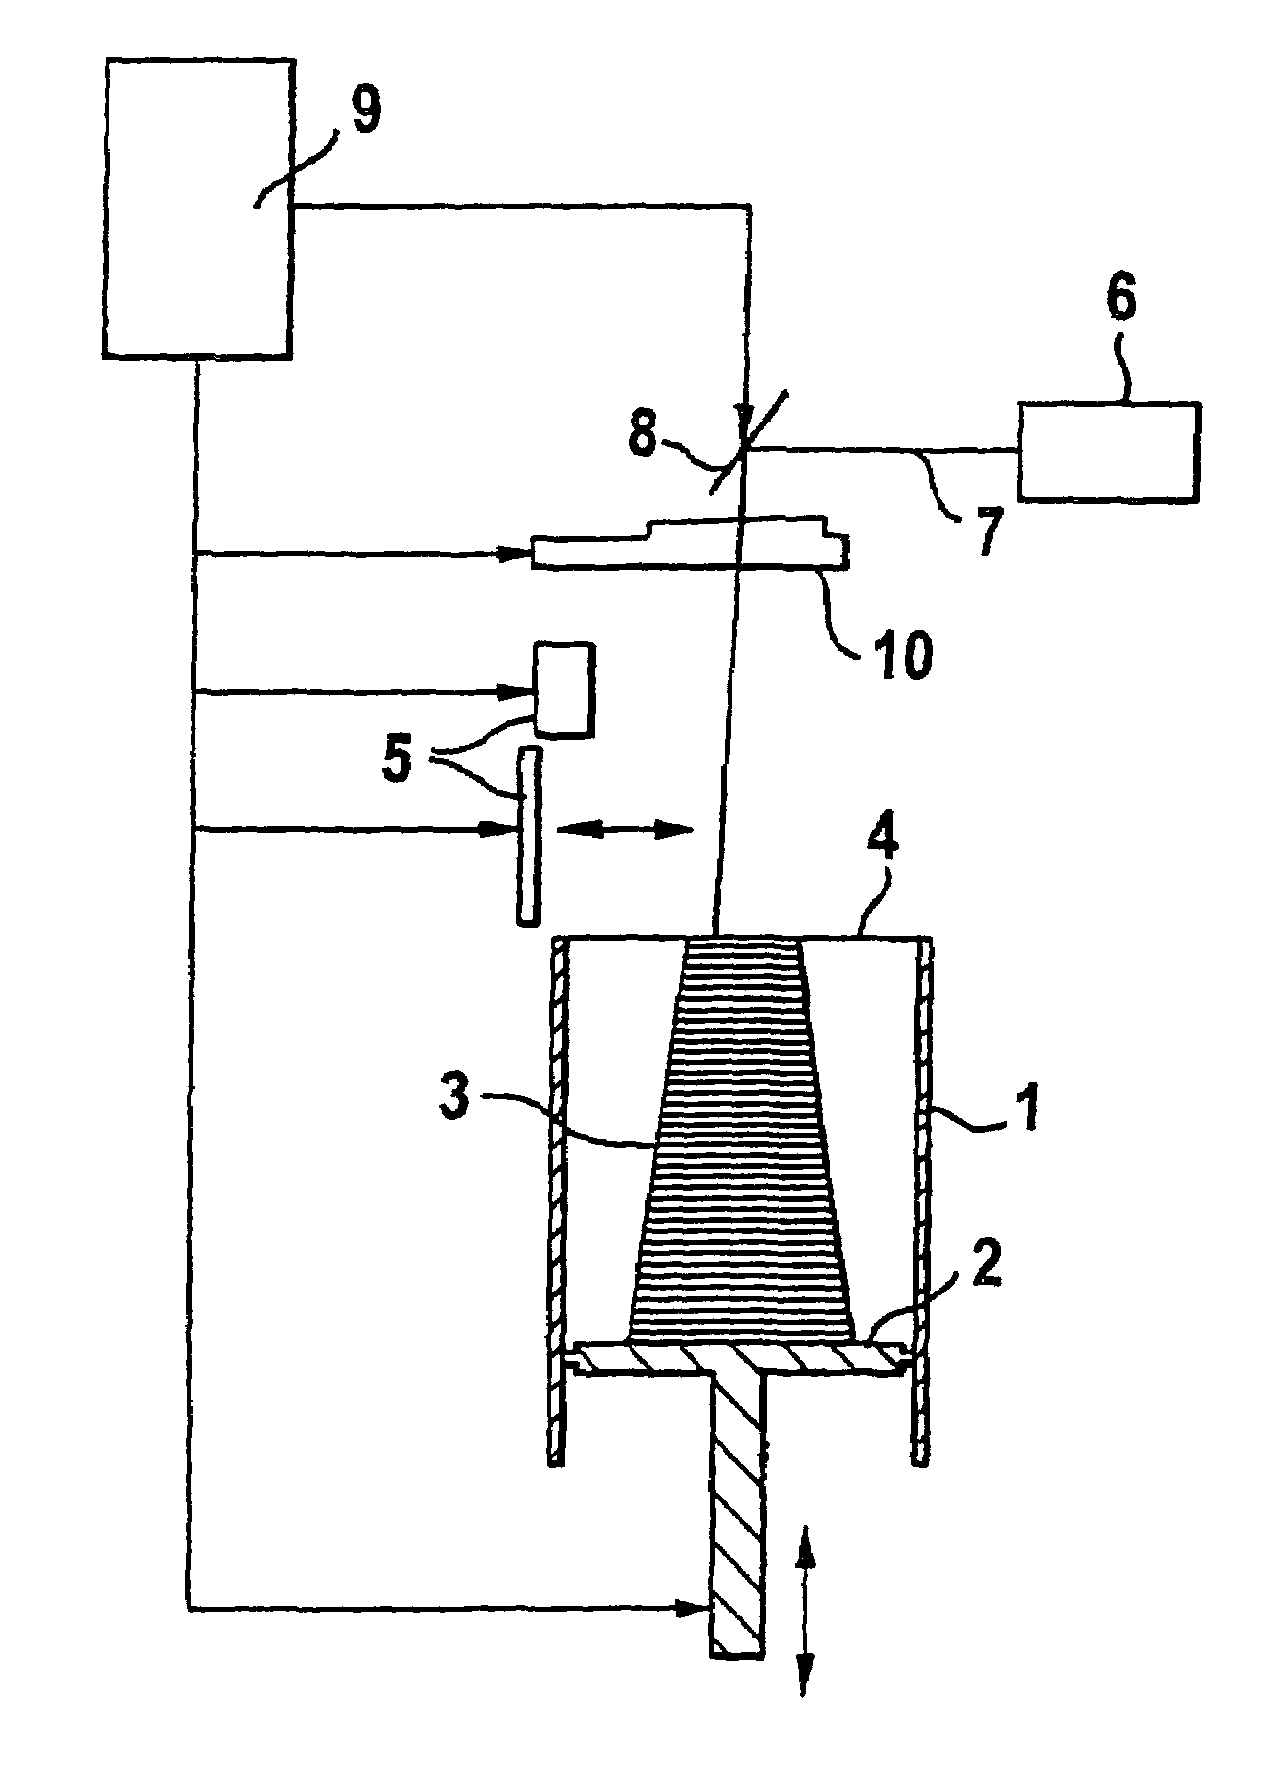 Device for layerwise manufacturing of a three-dimensional object